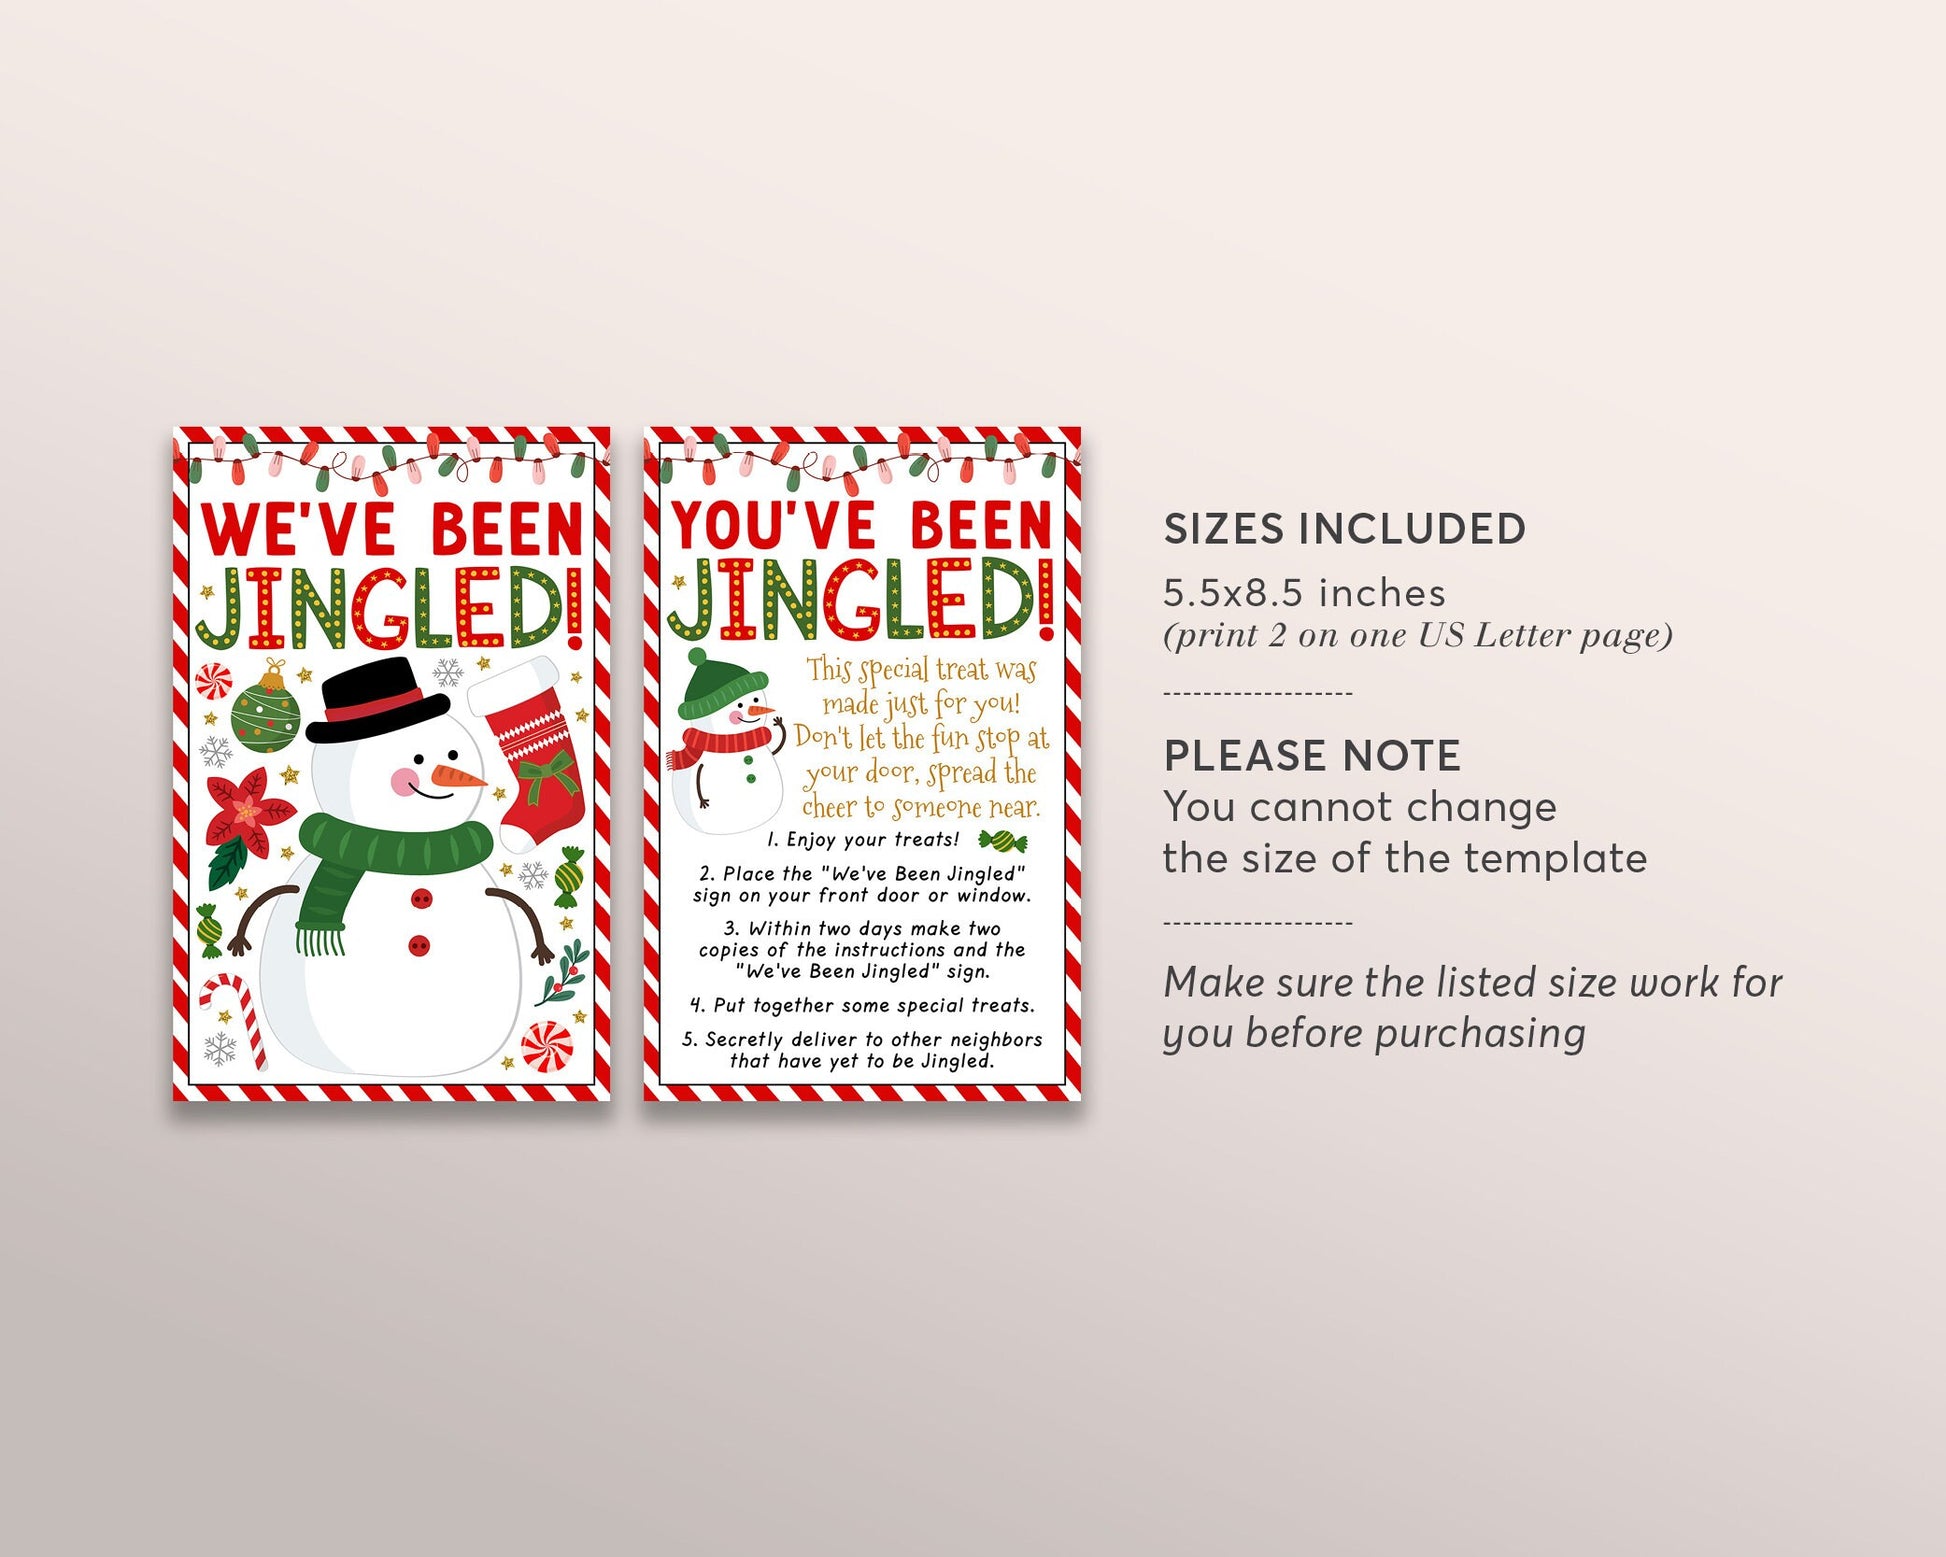 We've Been Ho Ho Ho'd Christmas Game Editable Template, I've Been Jingled  Labels Printable, Santa Sign Instructions, Holiday Party Games